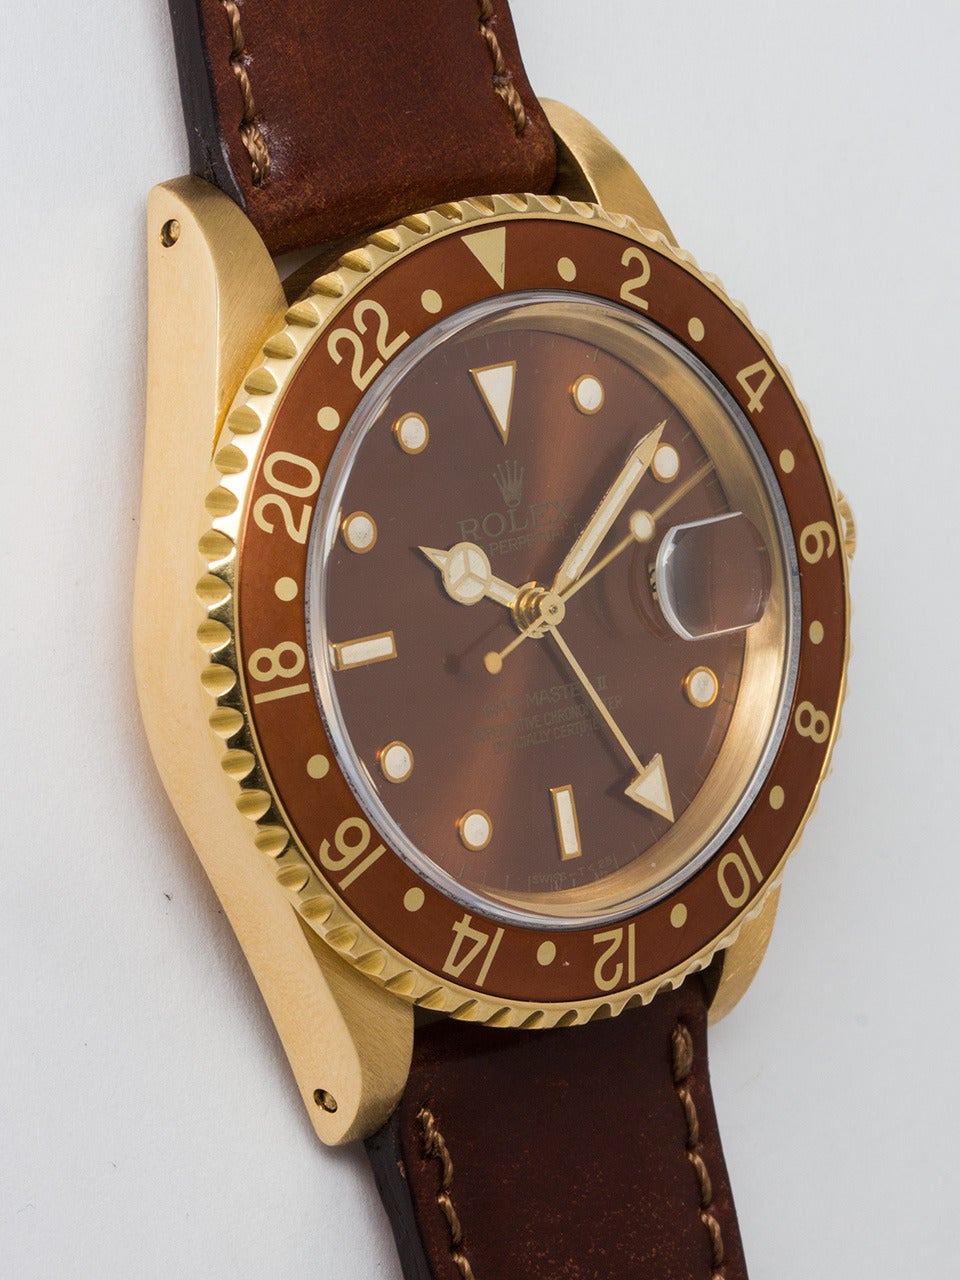 Rolex 18K Yellow Gold GMT-Master II Wristwatch, ref 16718 serial number L2 circa 1988. 40mm Oyster case with bronze 24 hour bezel and sapphire crystal. Lovely root beer dial with tritium markers and hands. Powered self winding movement with